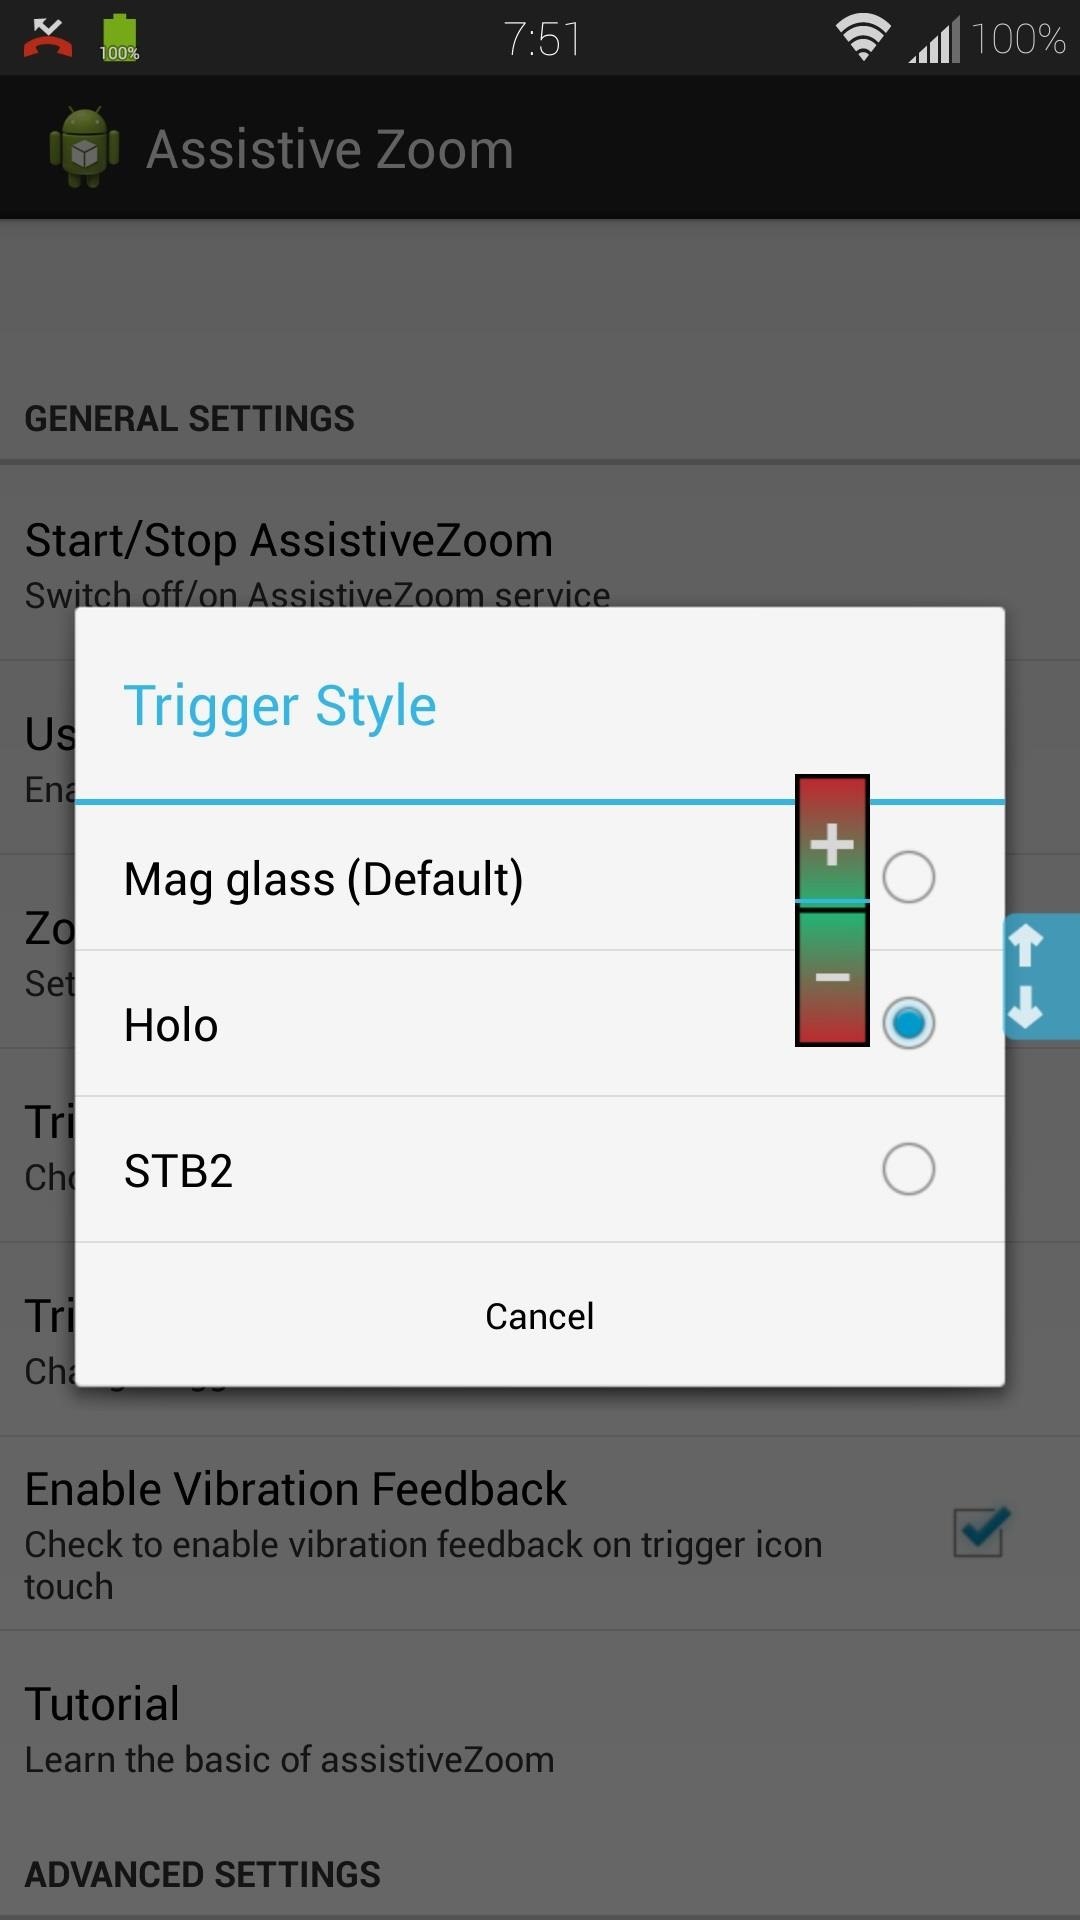 How to Zoom In & Out of Any App Using Just One Finger on Your Samsung Galaxy S4